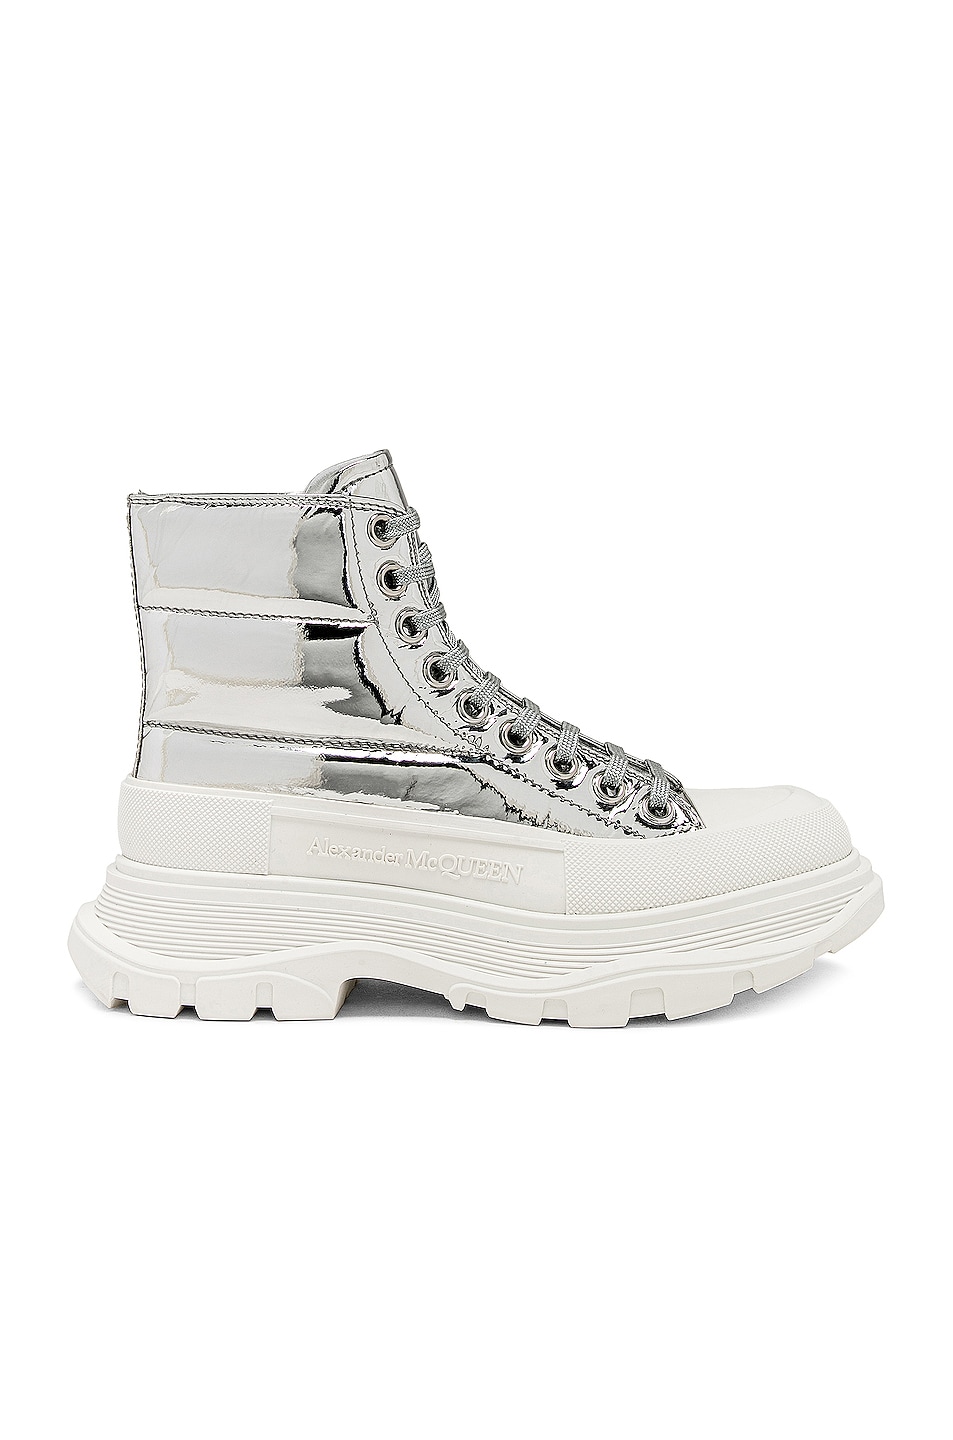 Image 1 of Alexander McQueen Metallic Mid Ankle Sneakers in Silver & White